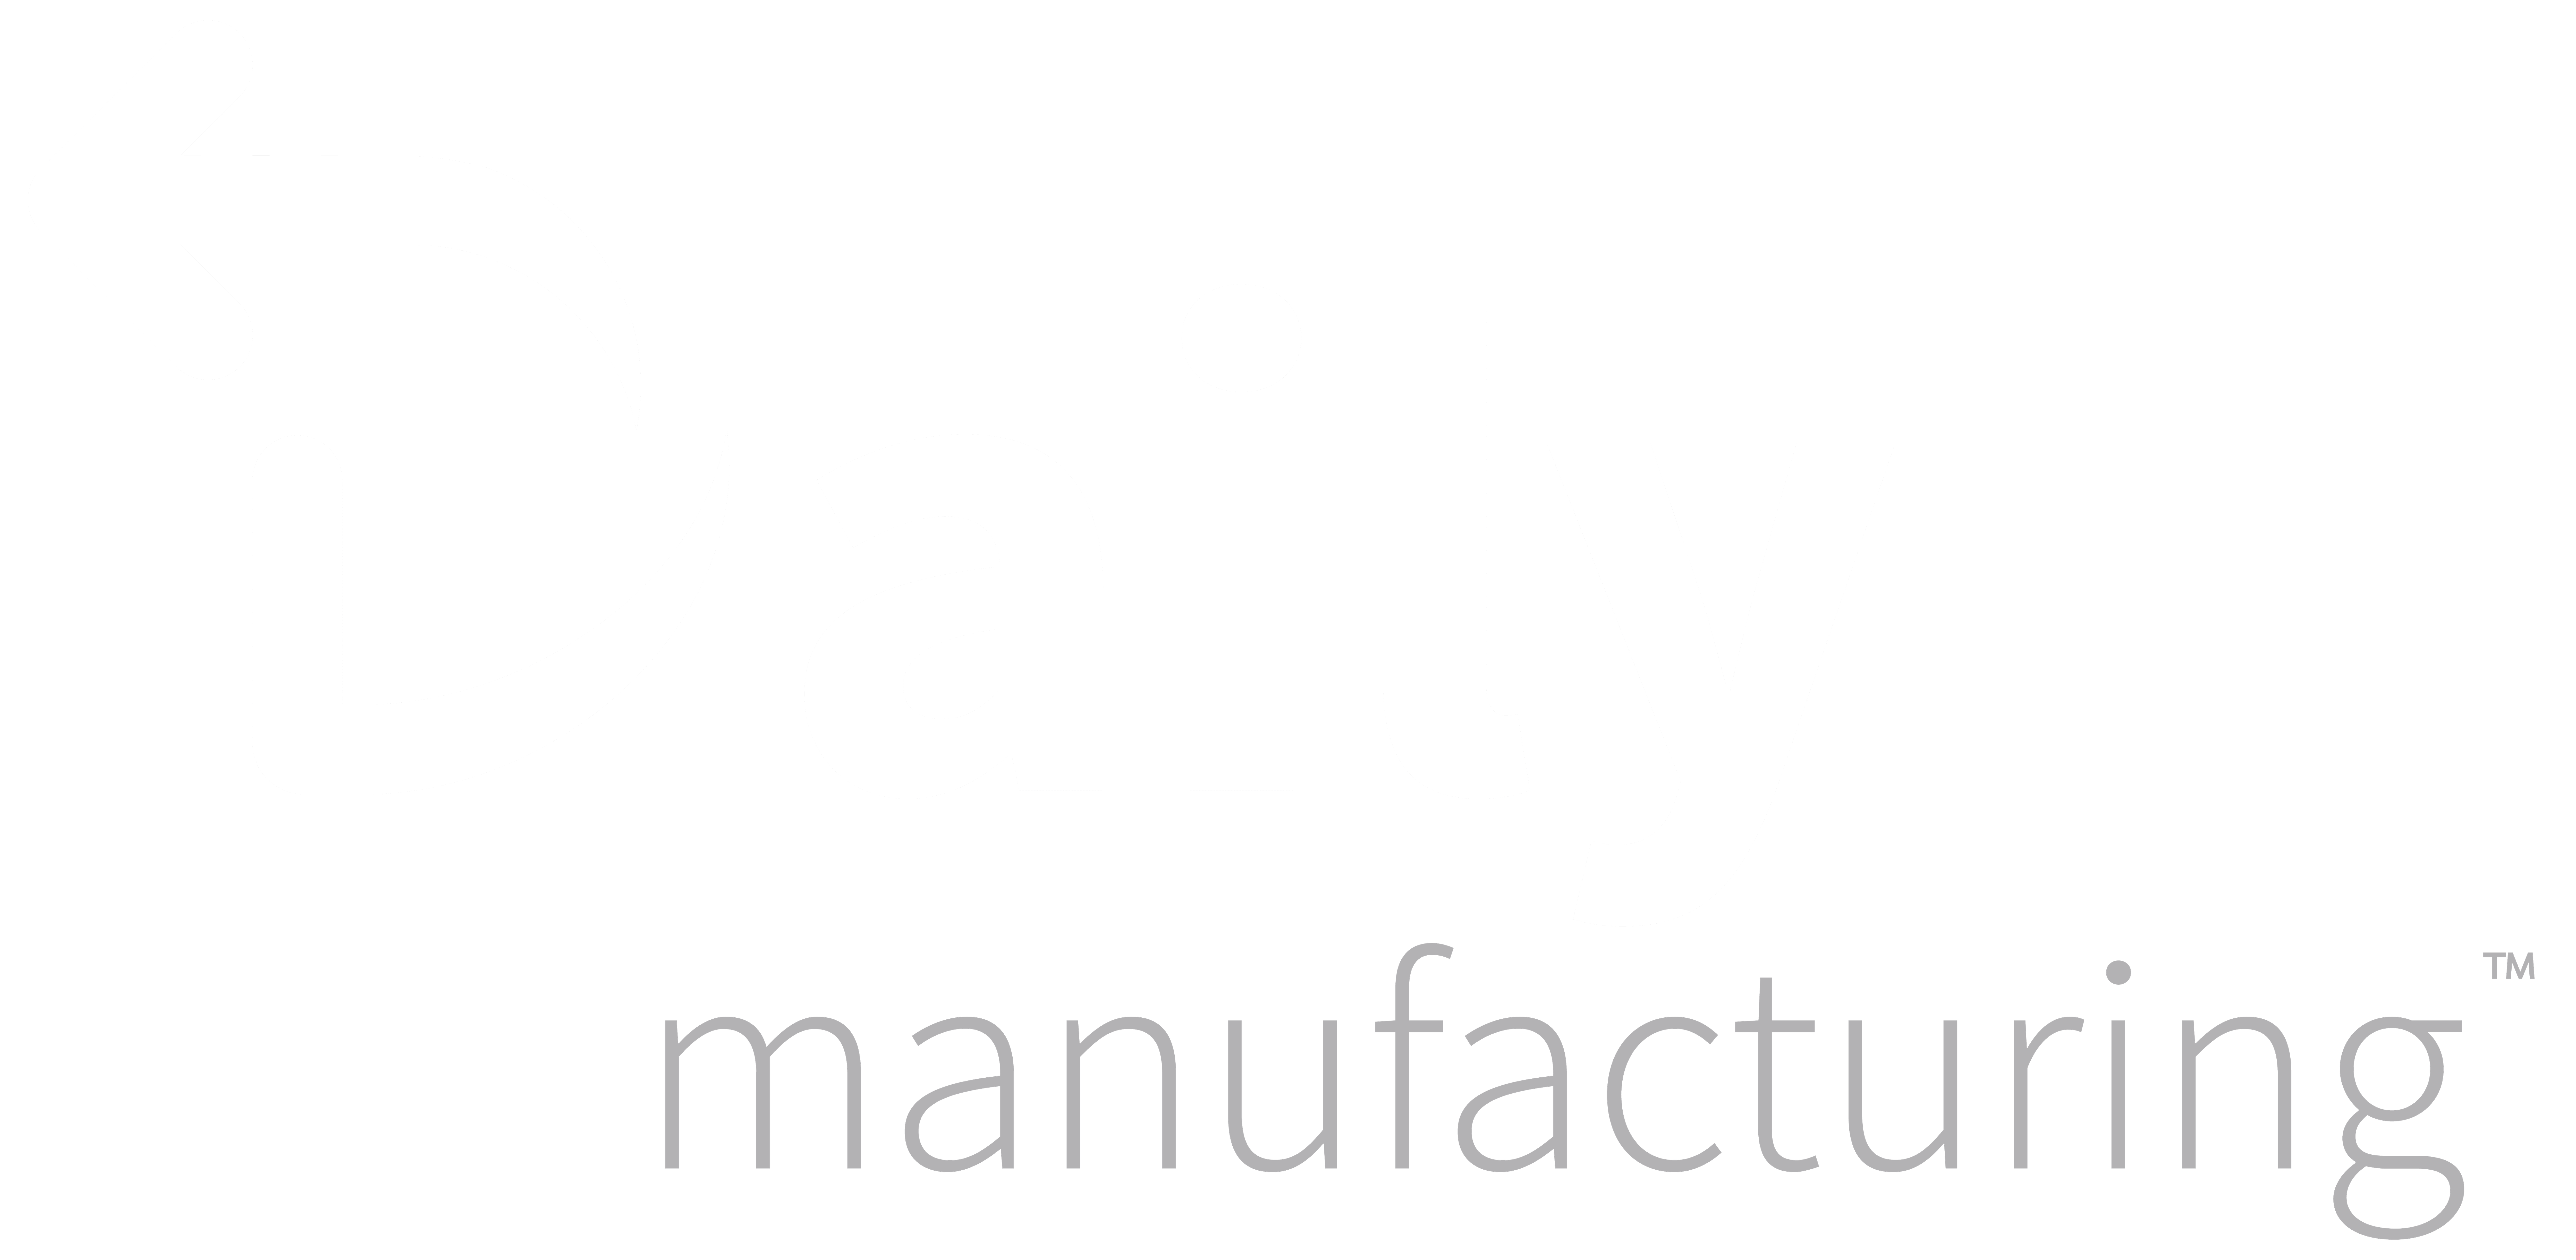 Daily Manufacturing